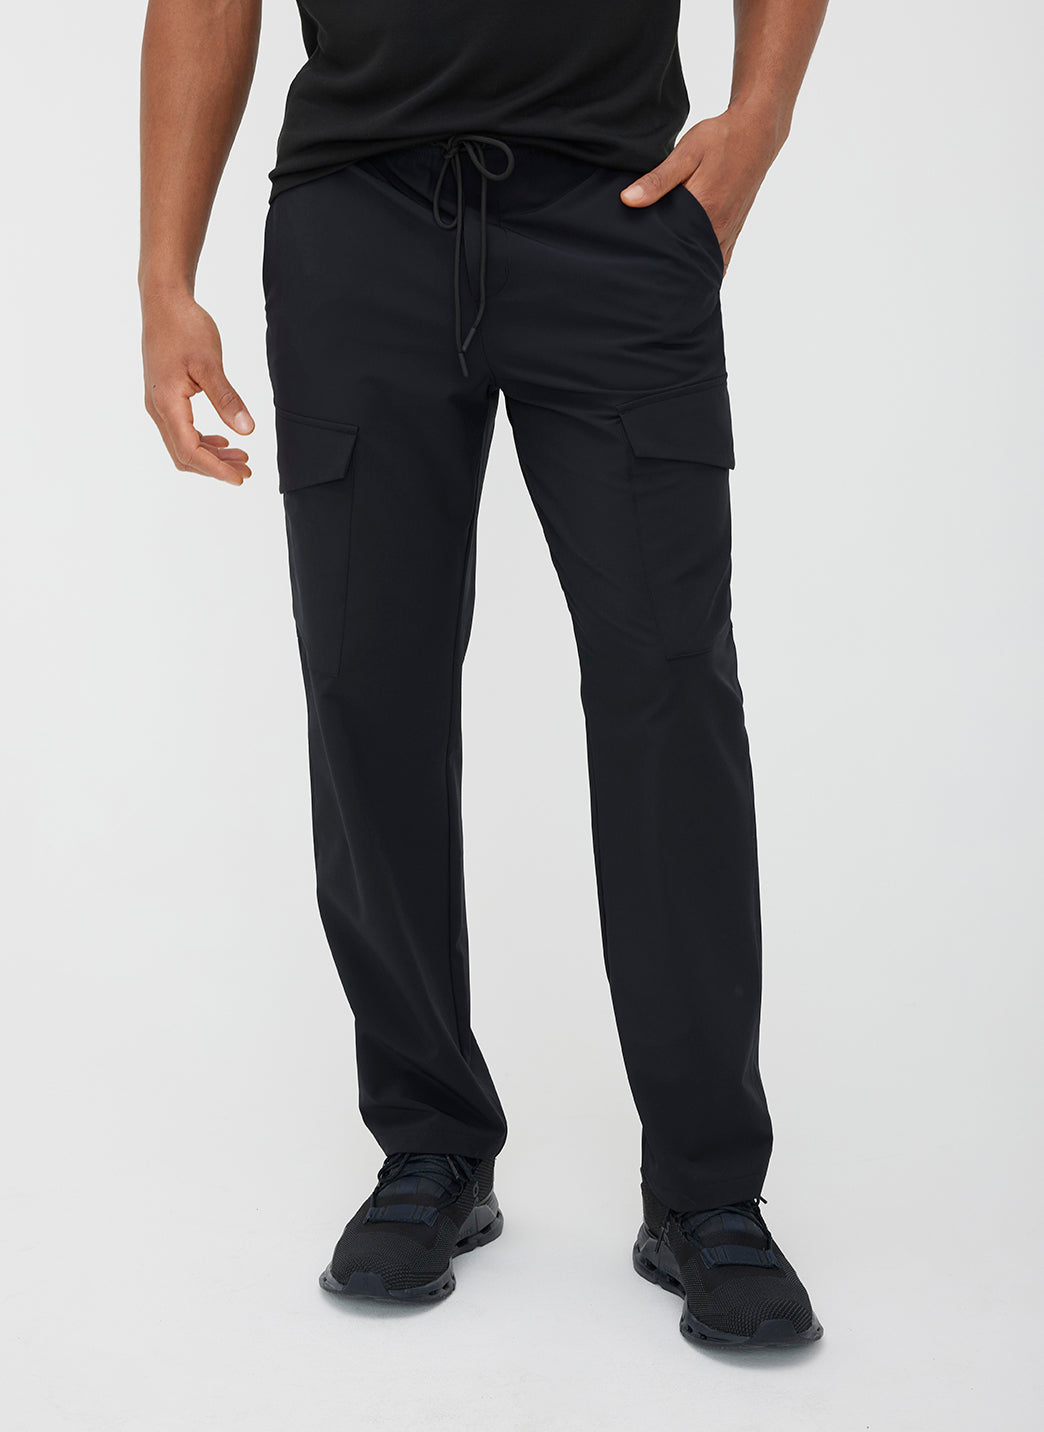 Kit and Ace — Urban Task Cargo Pants